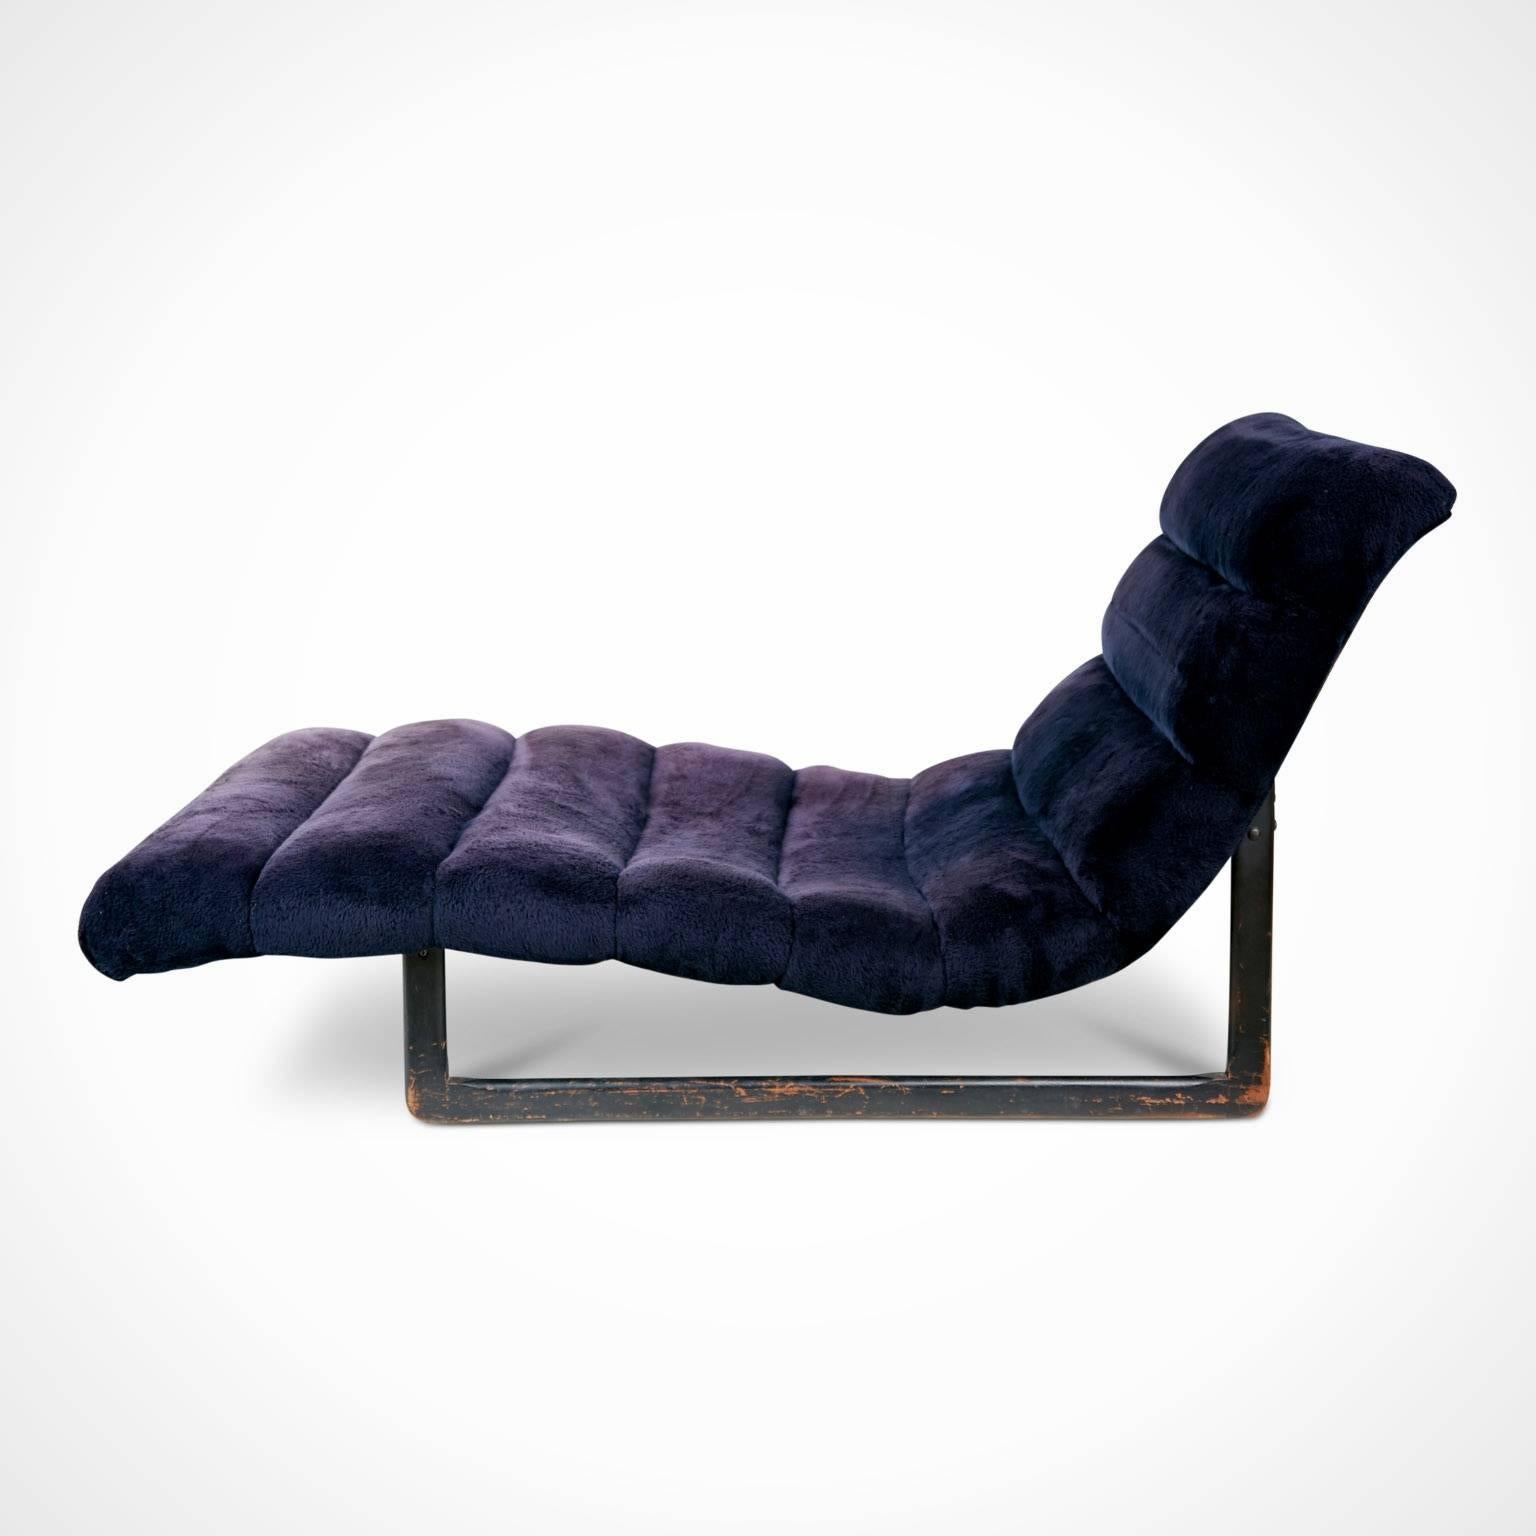 Faux Fur Adrian Pearsall Chaise Lounge for Craft Associates, circa 1960